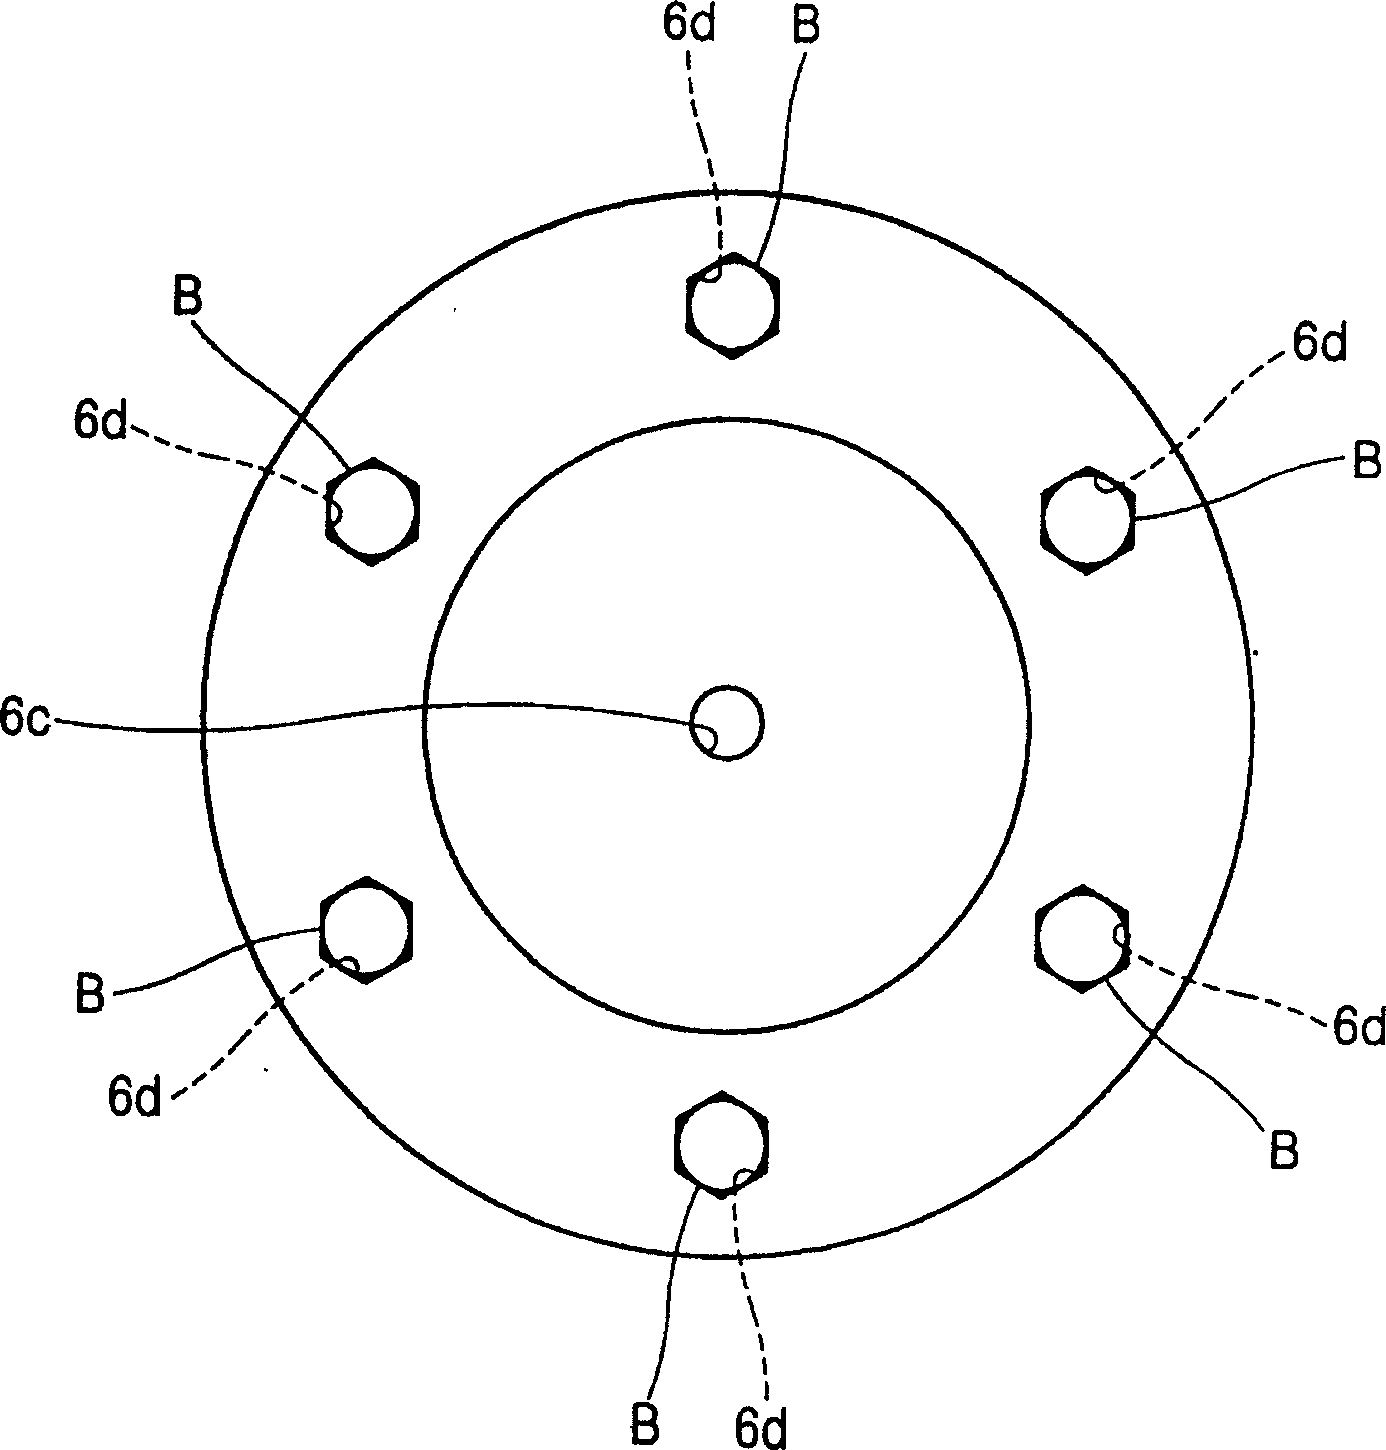 Fixed structure of disk for setting vortex in vortex type compressor